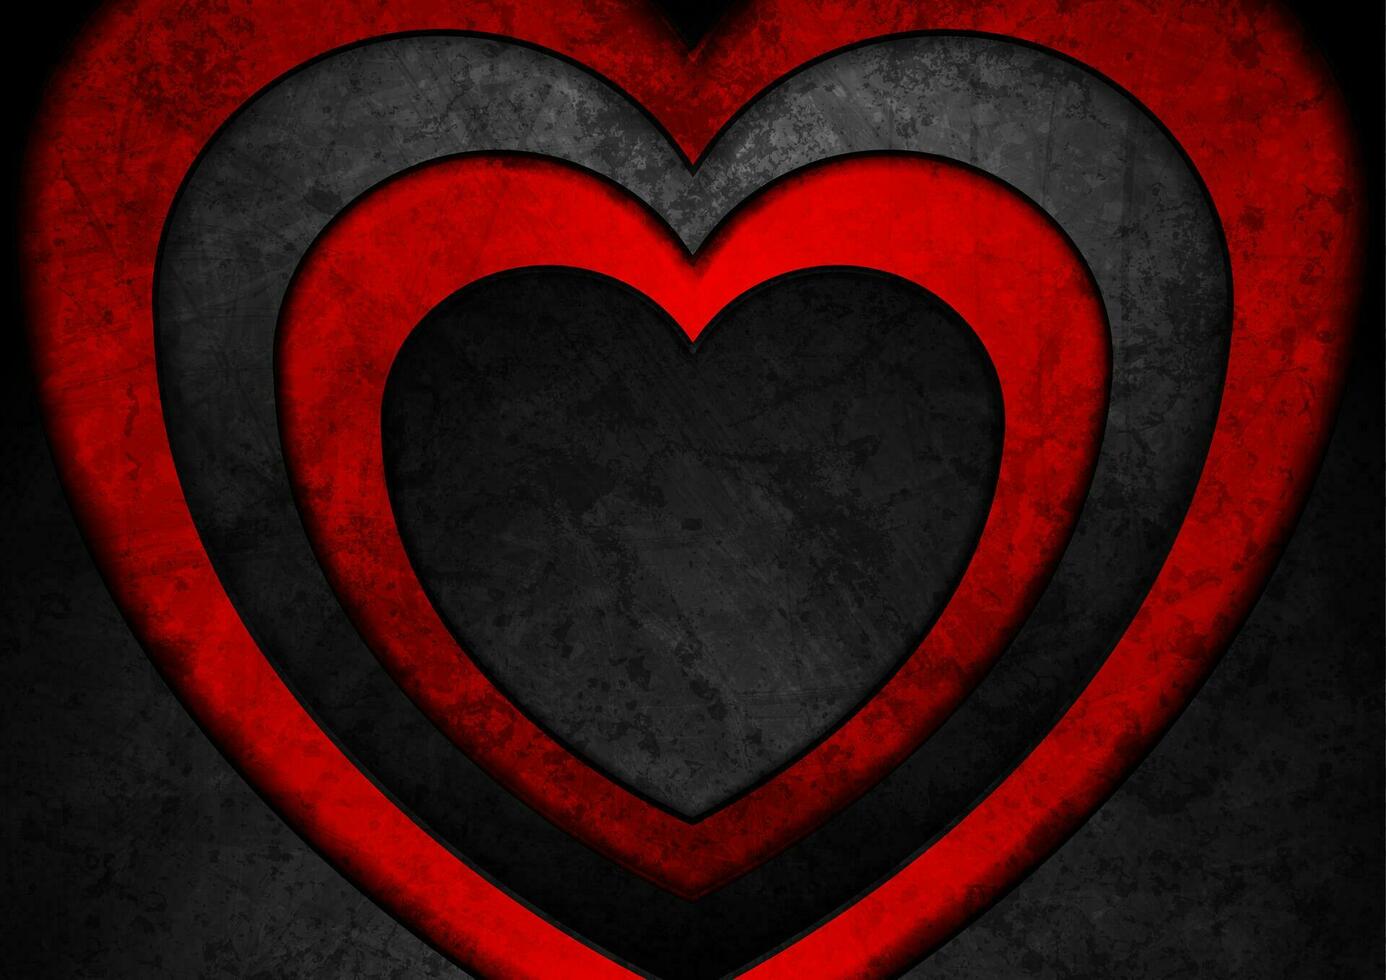 Contrast red and black hearts grunge abstract background vector